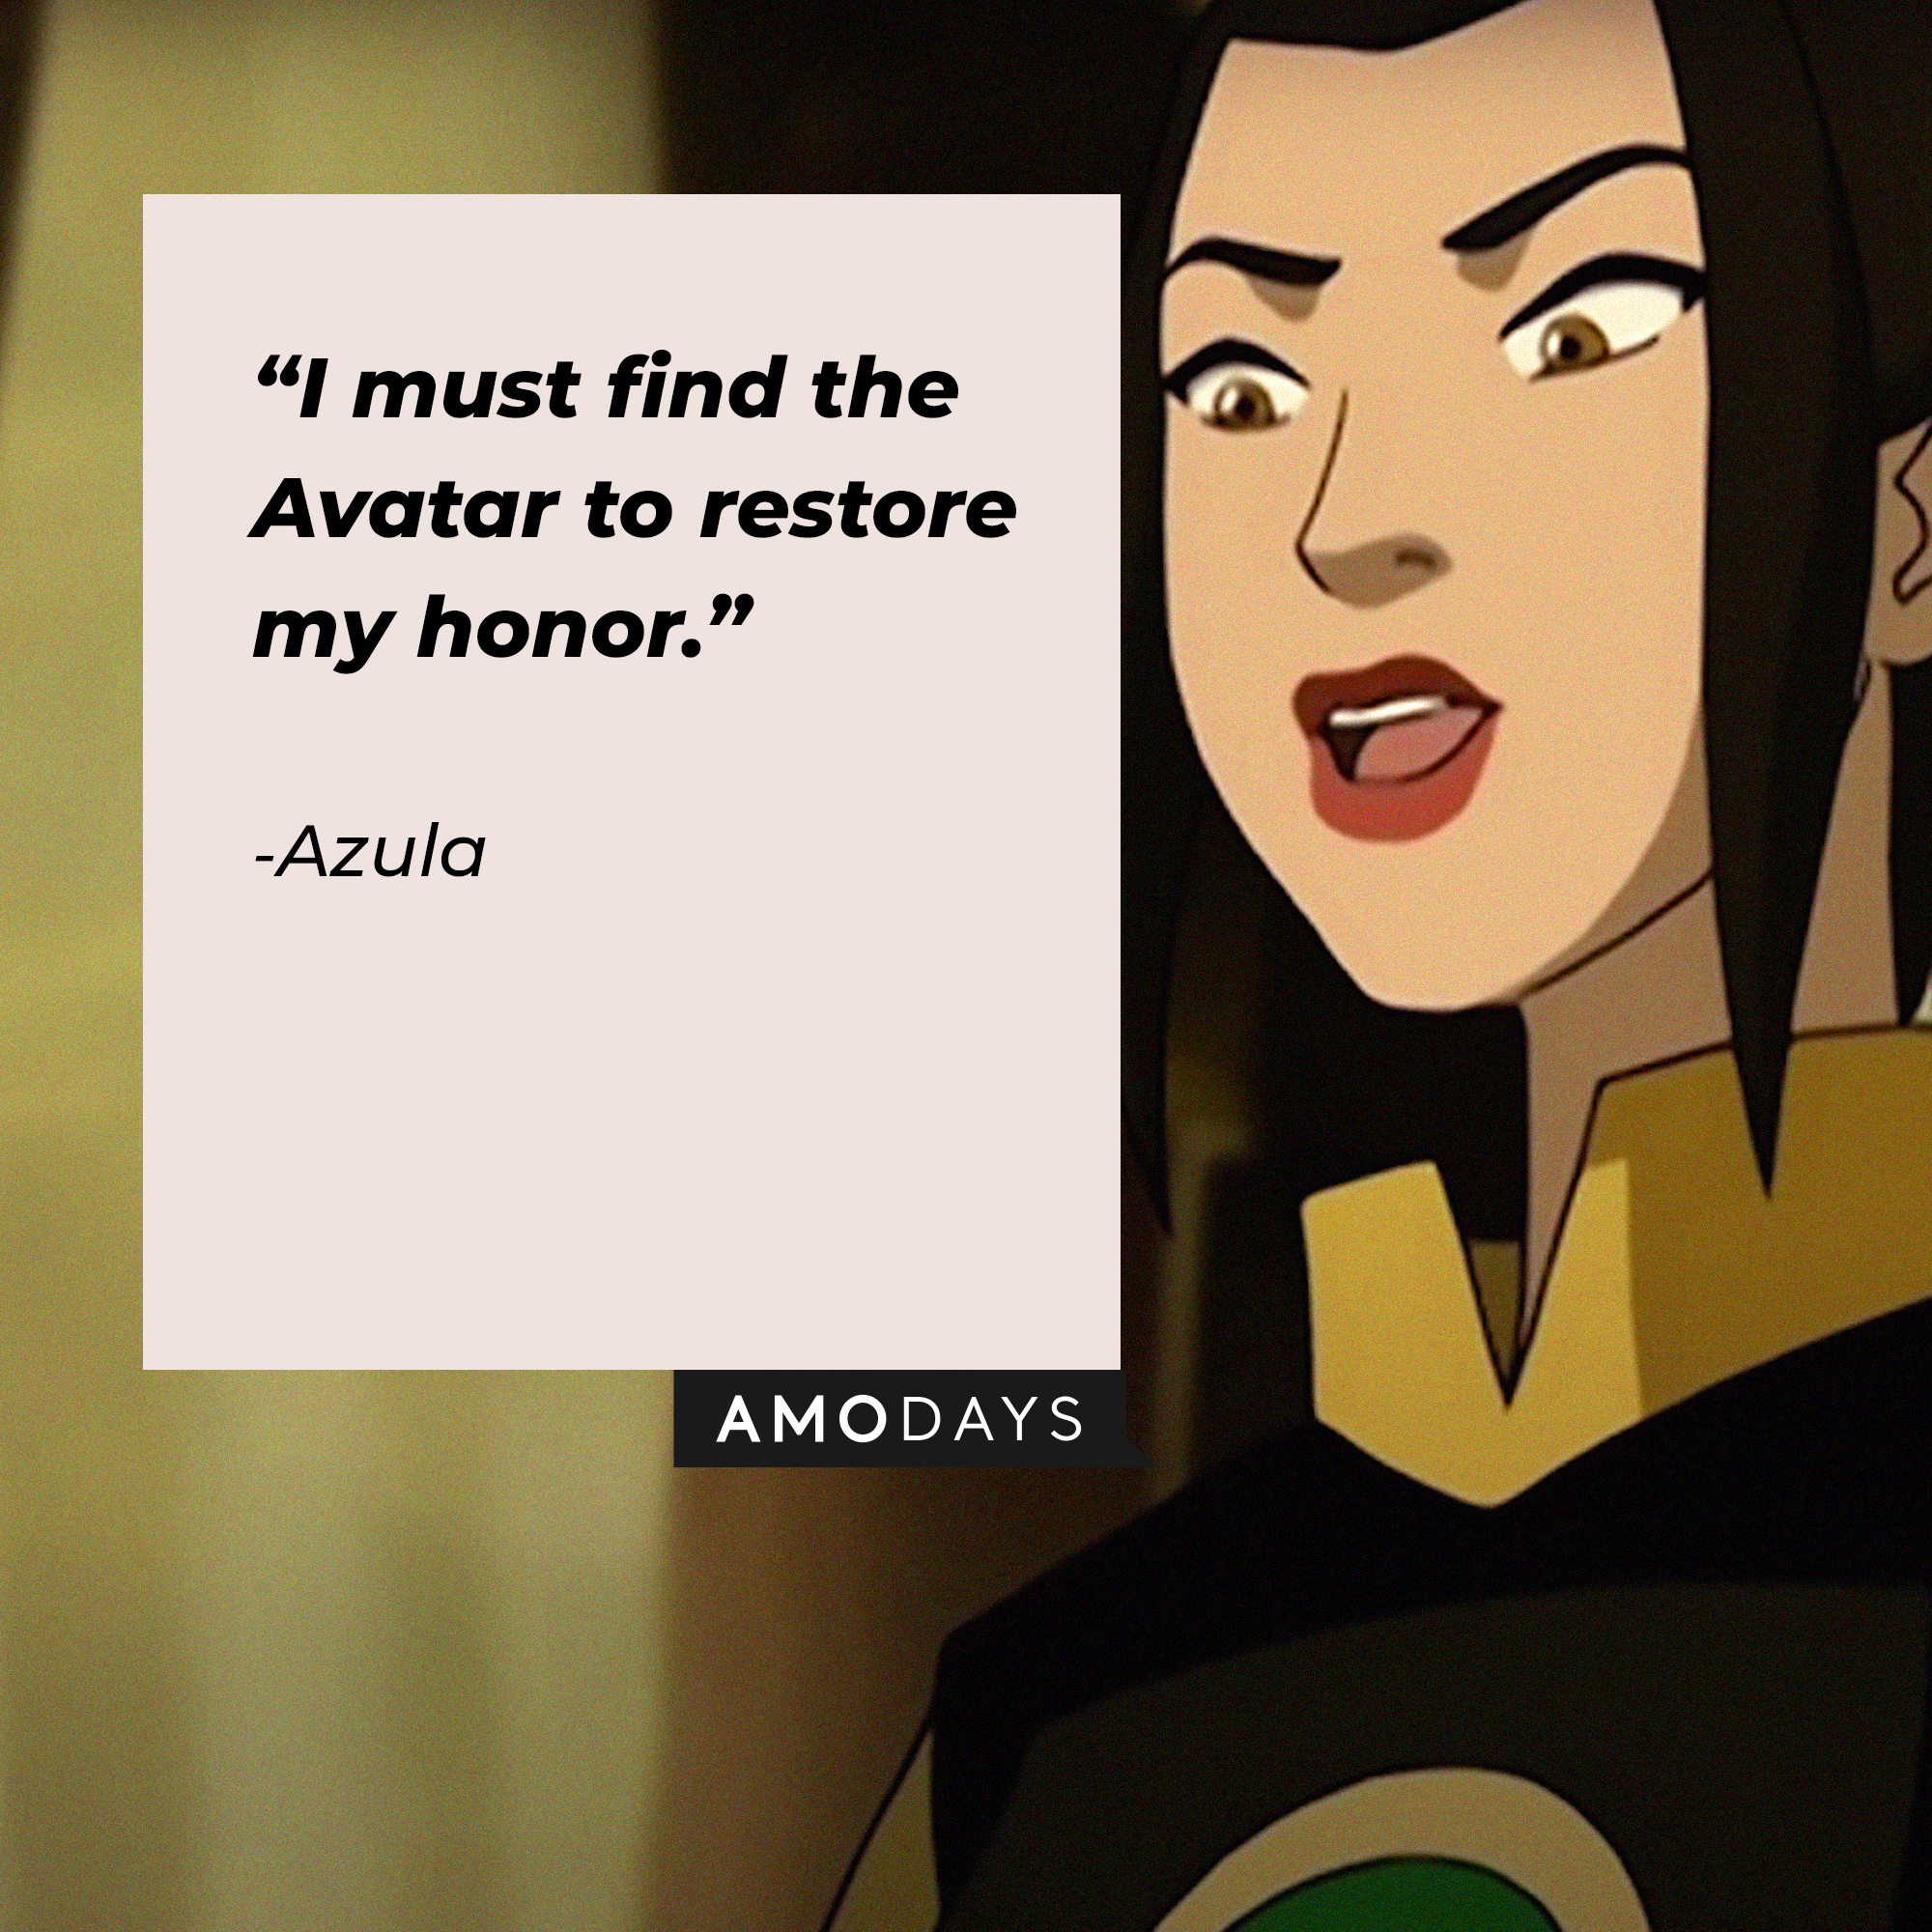 Azula's quote: “I must find the Avatar to restore my honor.” | Source: youtube.com/TeamAvatar